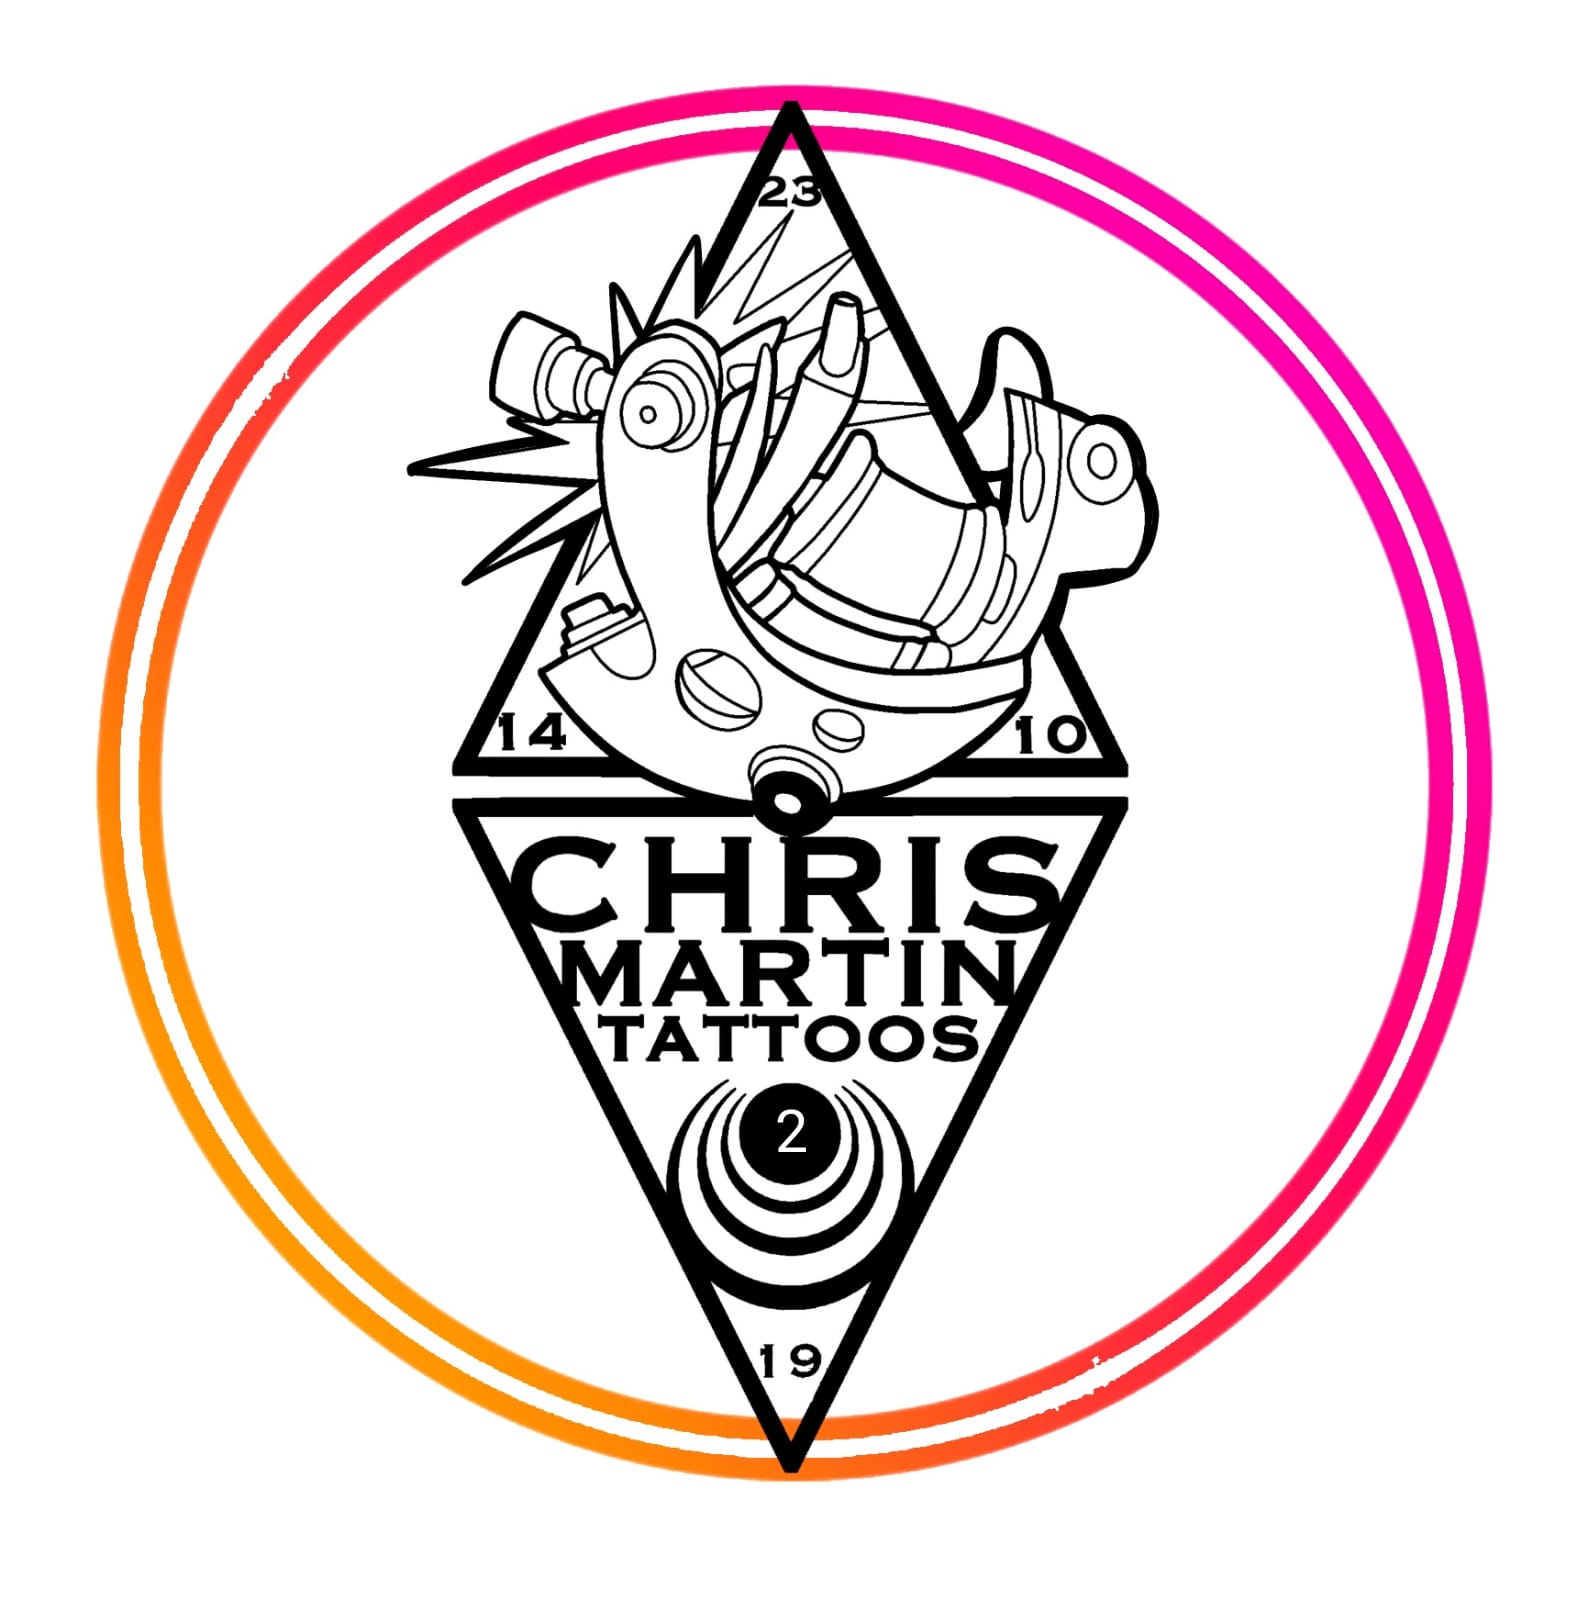 Does anyone know what Chris Martins left arm tattoo says  rColdplay